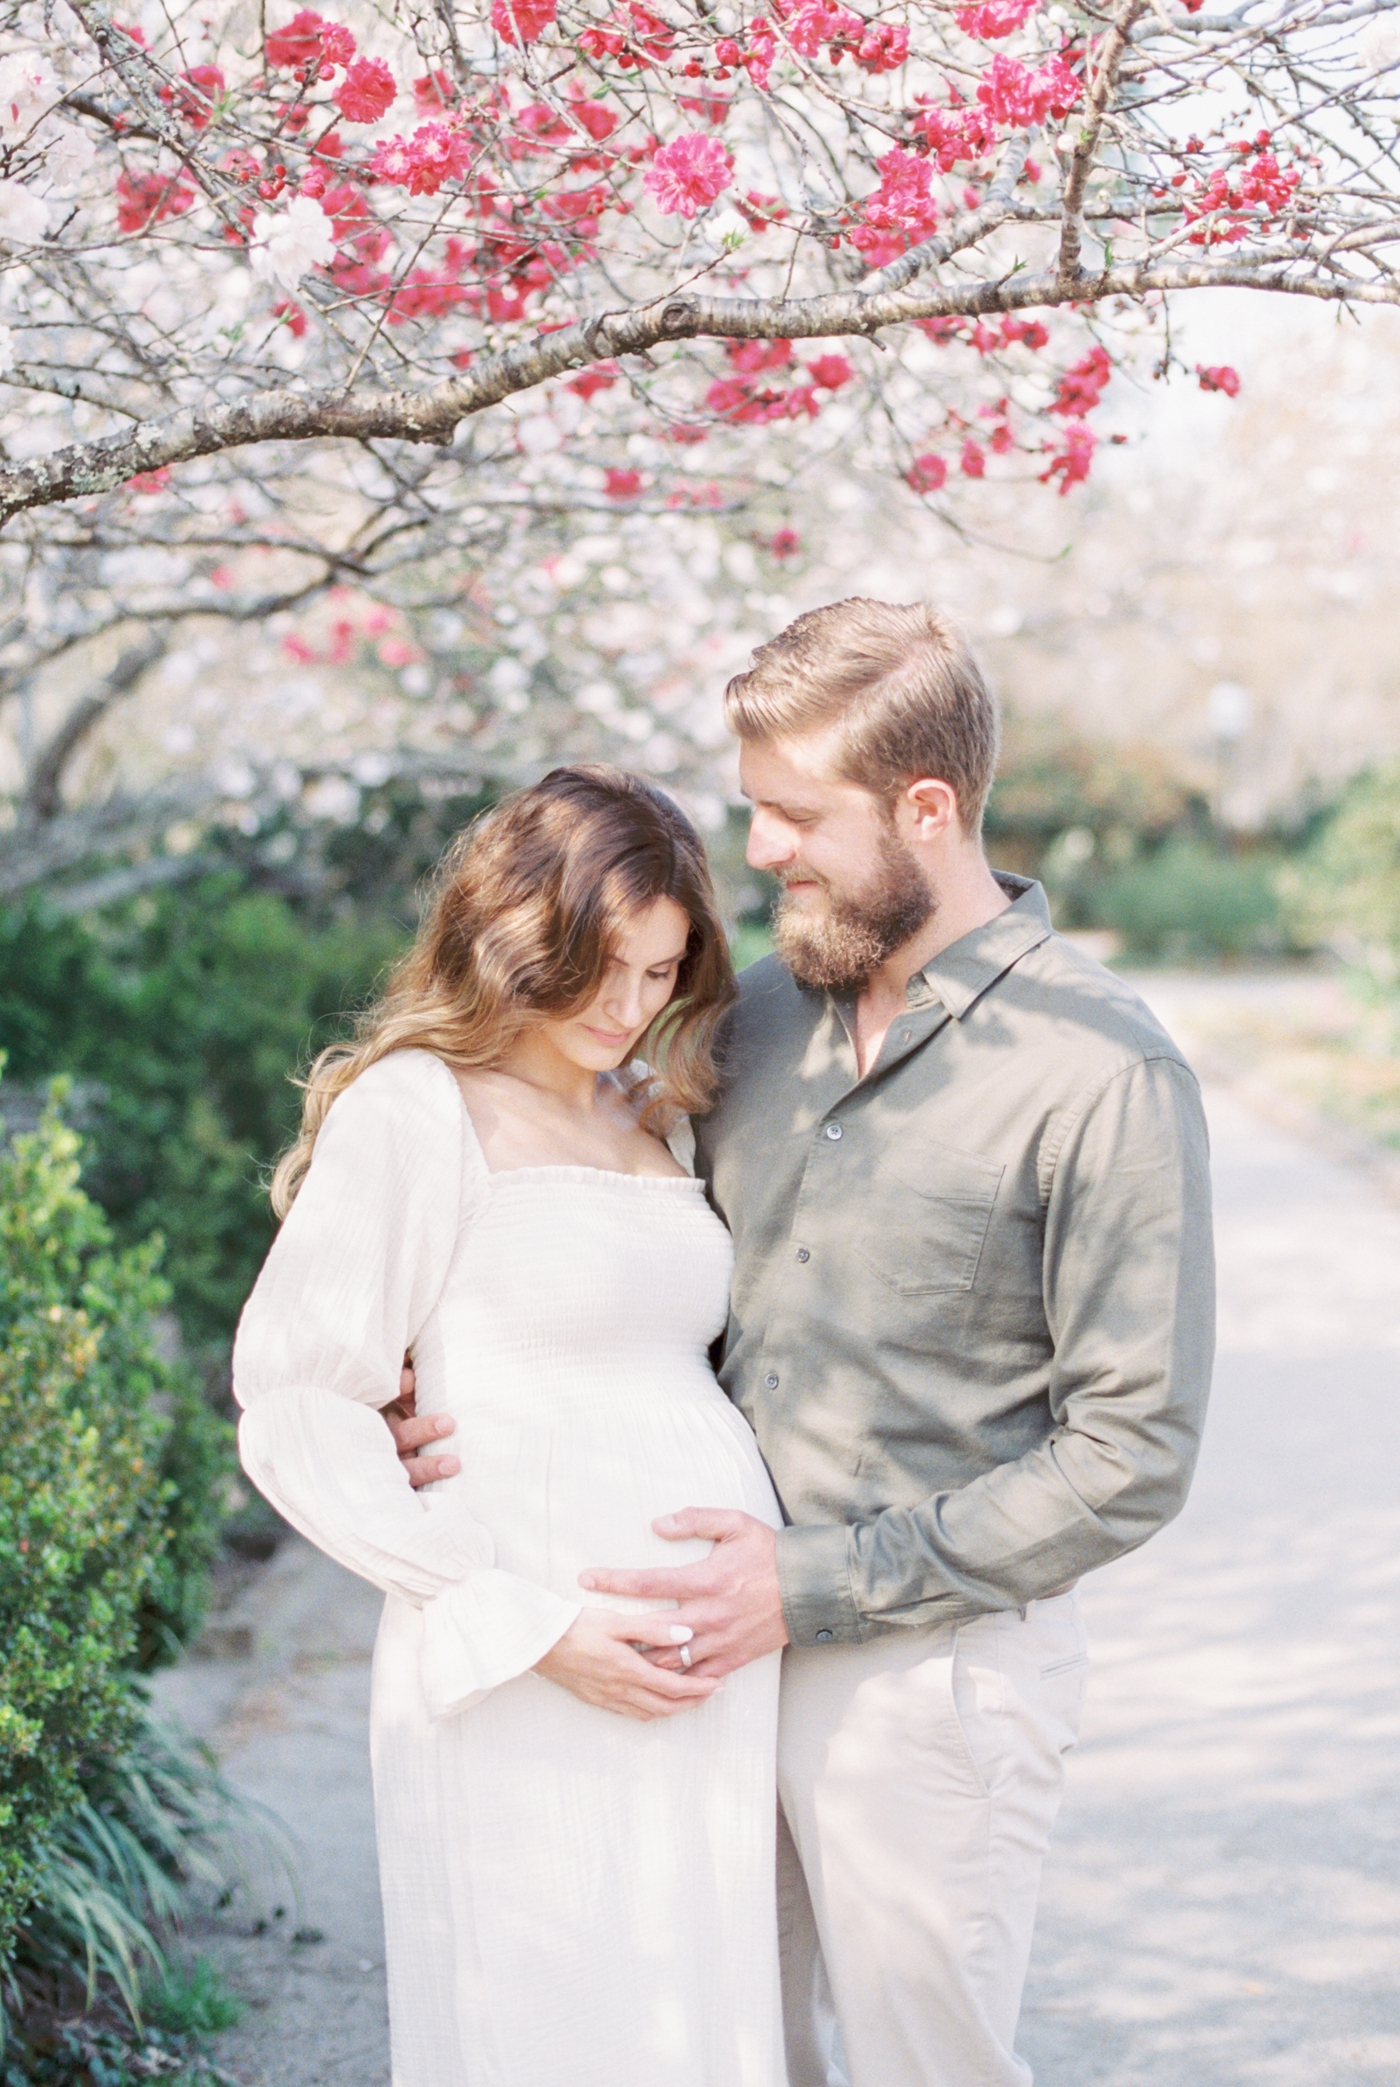 Expecting parents embracing under the pink flowering trees at Hampton Park. Photo by fine art film photographer, Caitlyn Motycka Photography.